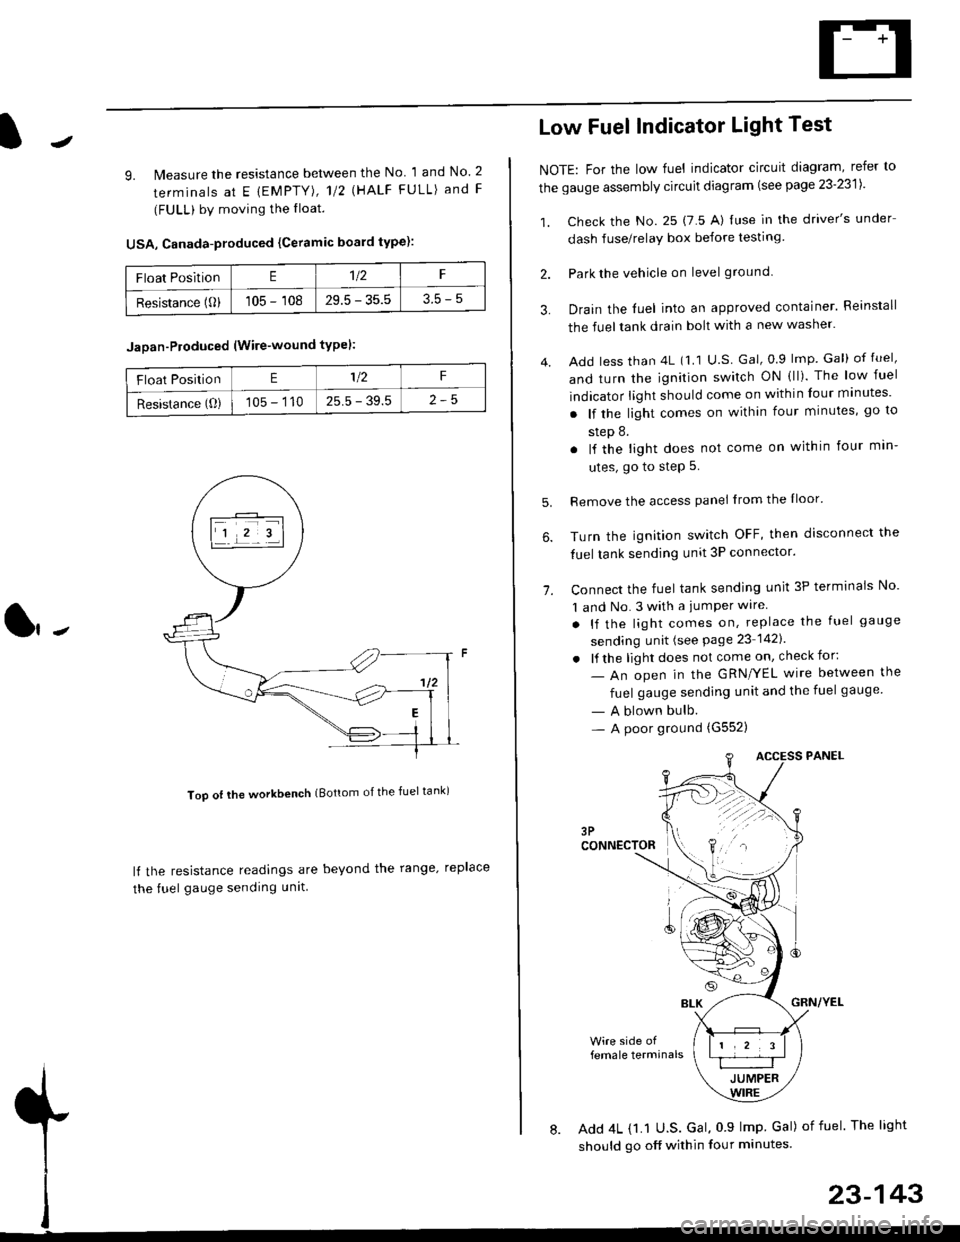 HONDA CIVIC 1996 6.G Owners Manual J
9. lMeasure the resistance between the No 1 and No. 2
terminals at E {EMPTY), 112 \HALF FULL) and F
(FULL) by moving the lloat.
USA, Canada-produced {Ceramic board type):
Too ot lhe workbench (Botto